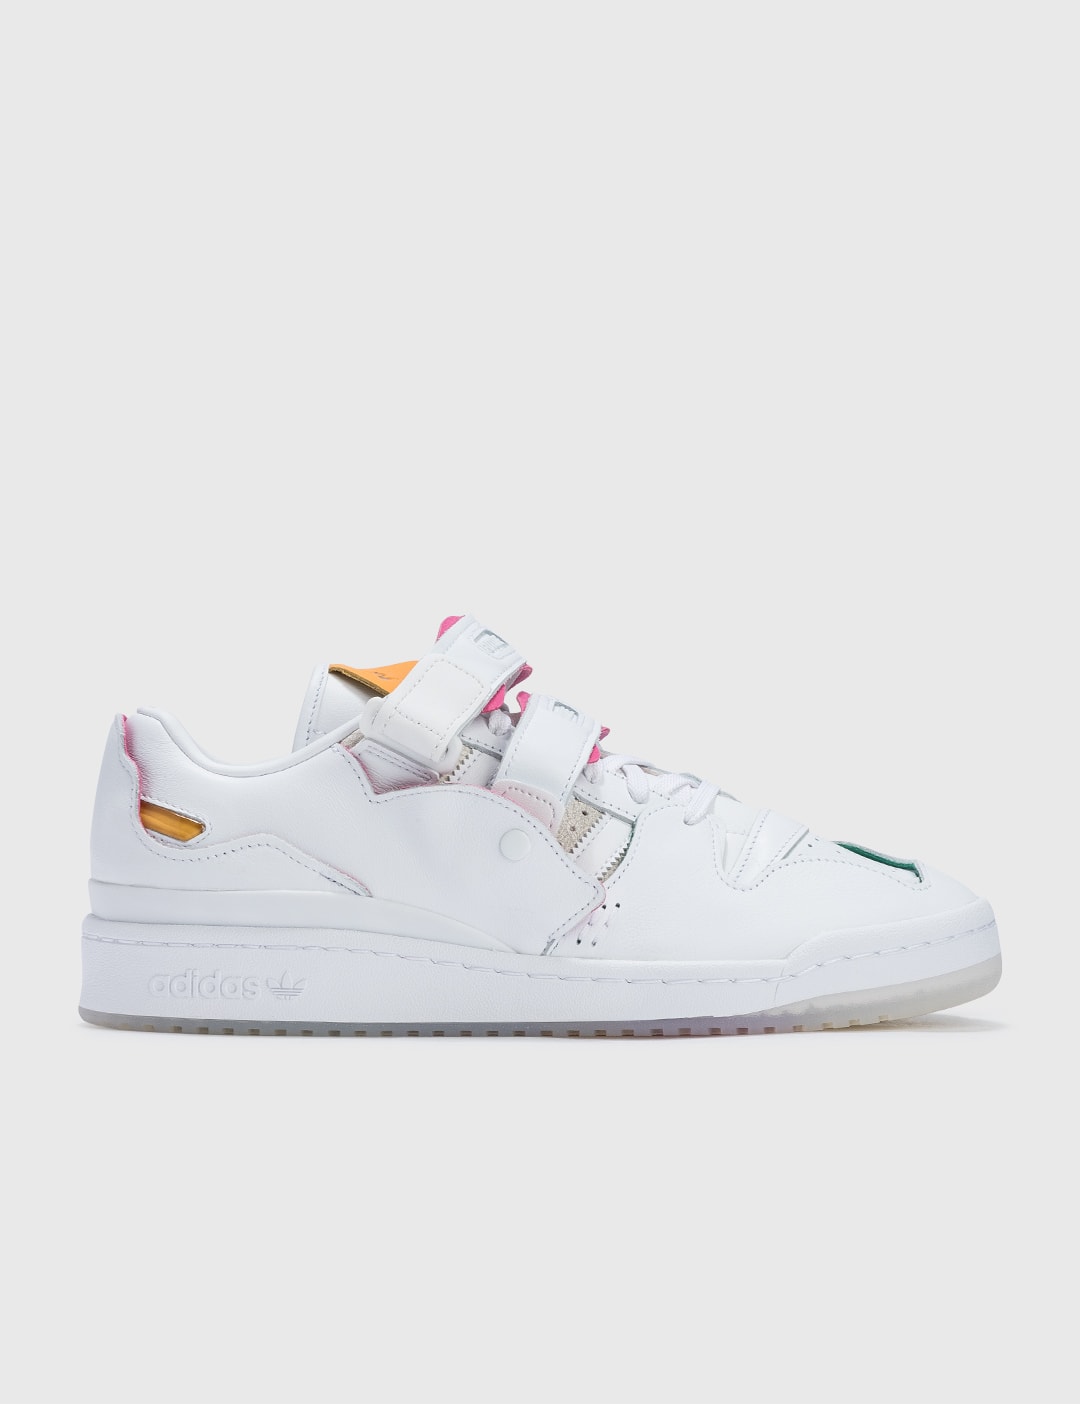 onregelmatig Afleiden laat staan Adidas Originals - Adidas Originals x FisN Forum Low | HBX - Globally  Curated Fashion and Lifestyle by Hypebeast